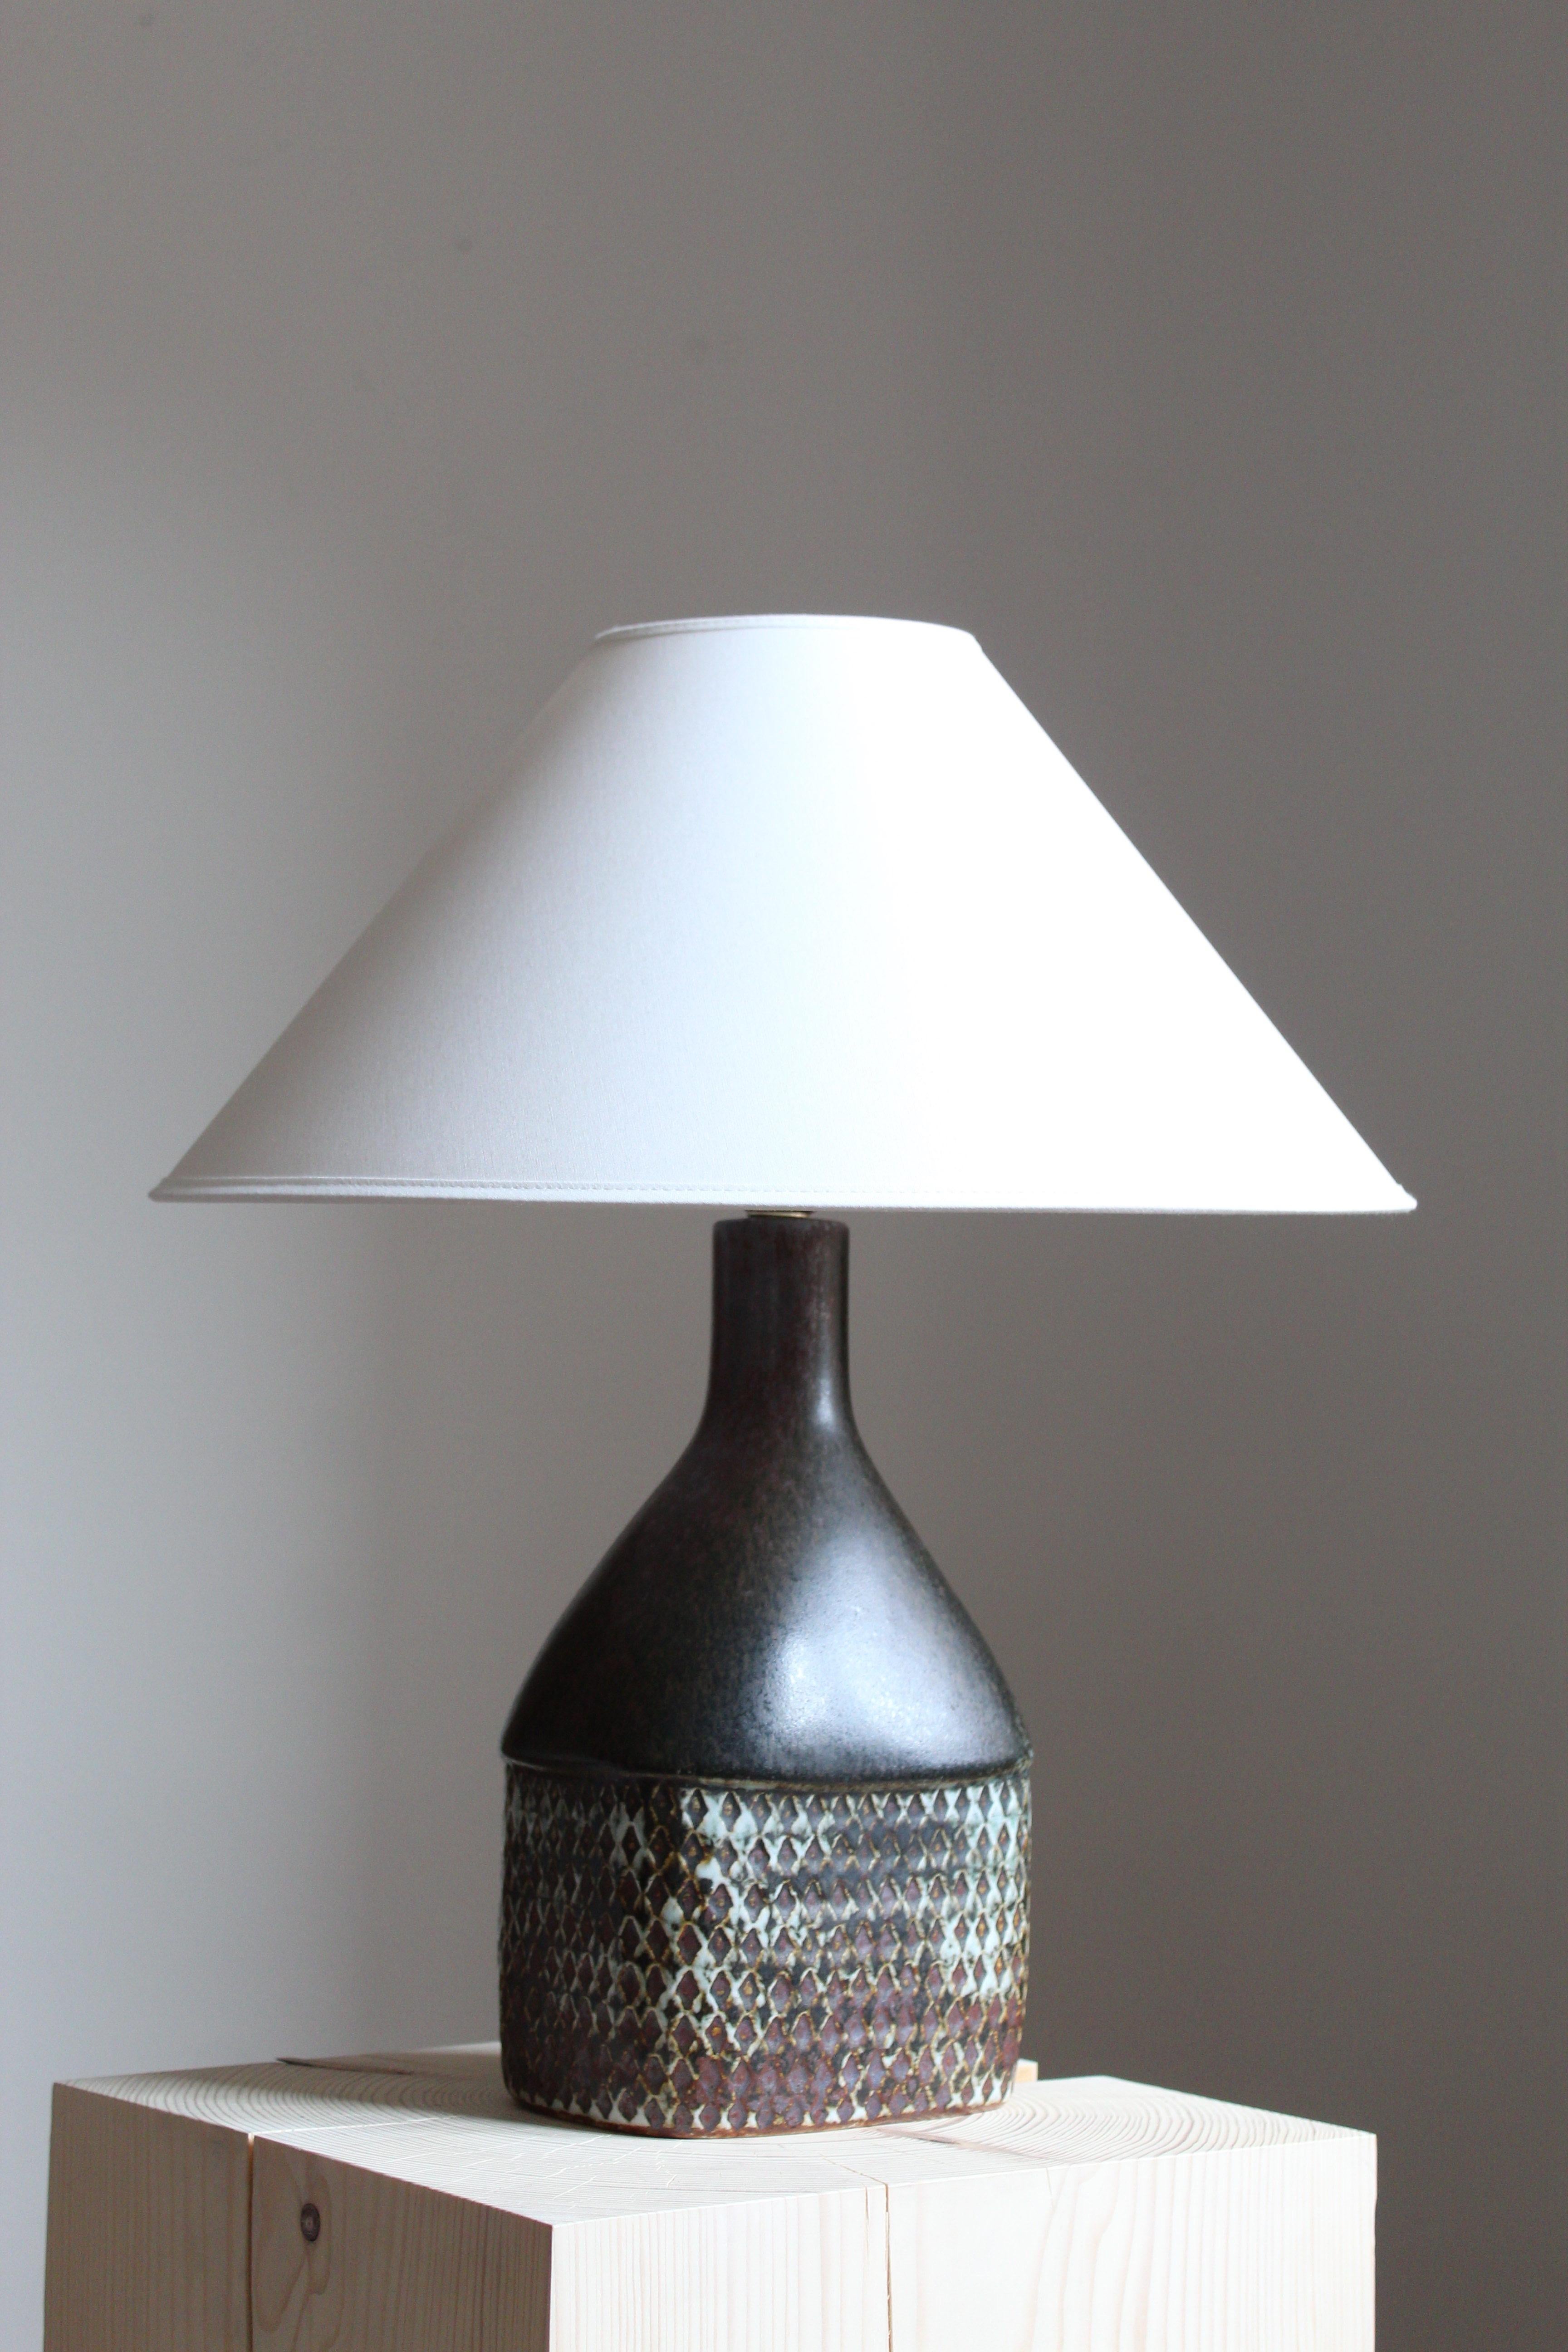 A table lamp or desk lamp designed and produced by Stig Lindberg. Produced by Gustavsberg. Marked with the Studio mark, separating this work from the large scale production series by the maker.

Sold without lampshade. Stated dimensions excluding